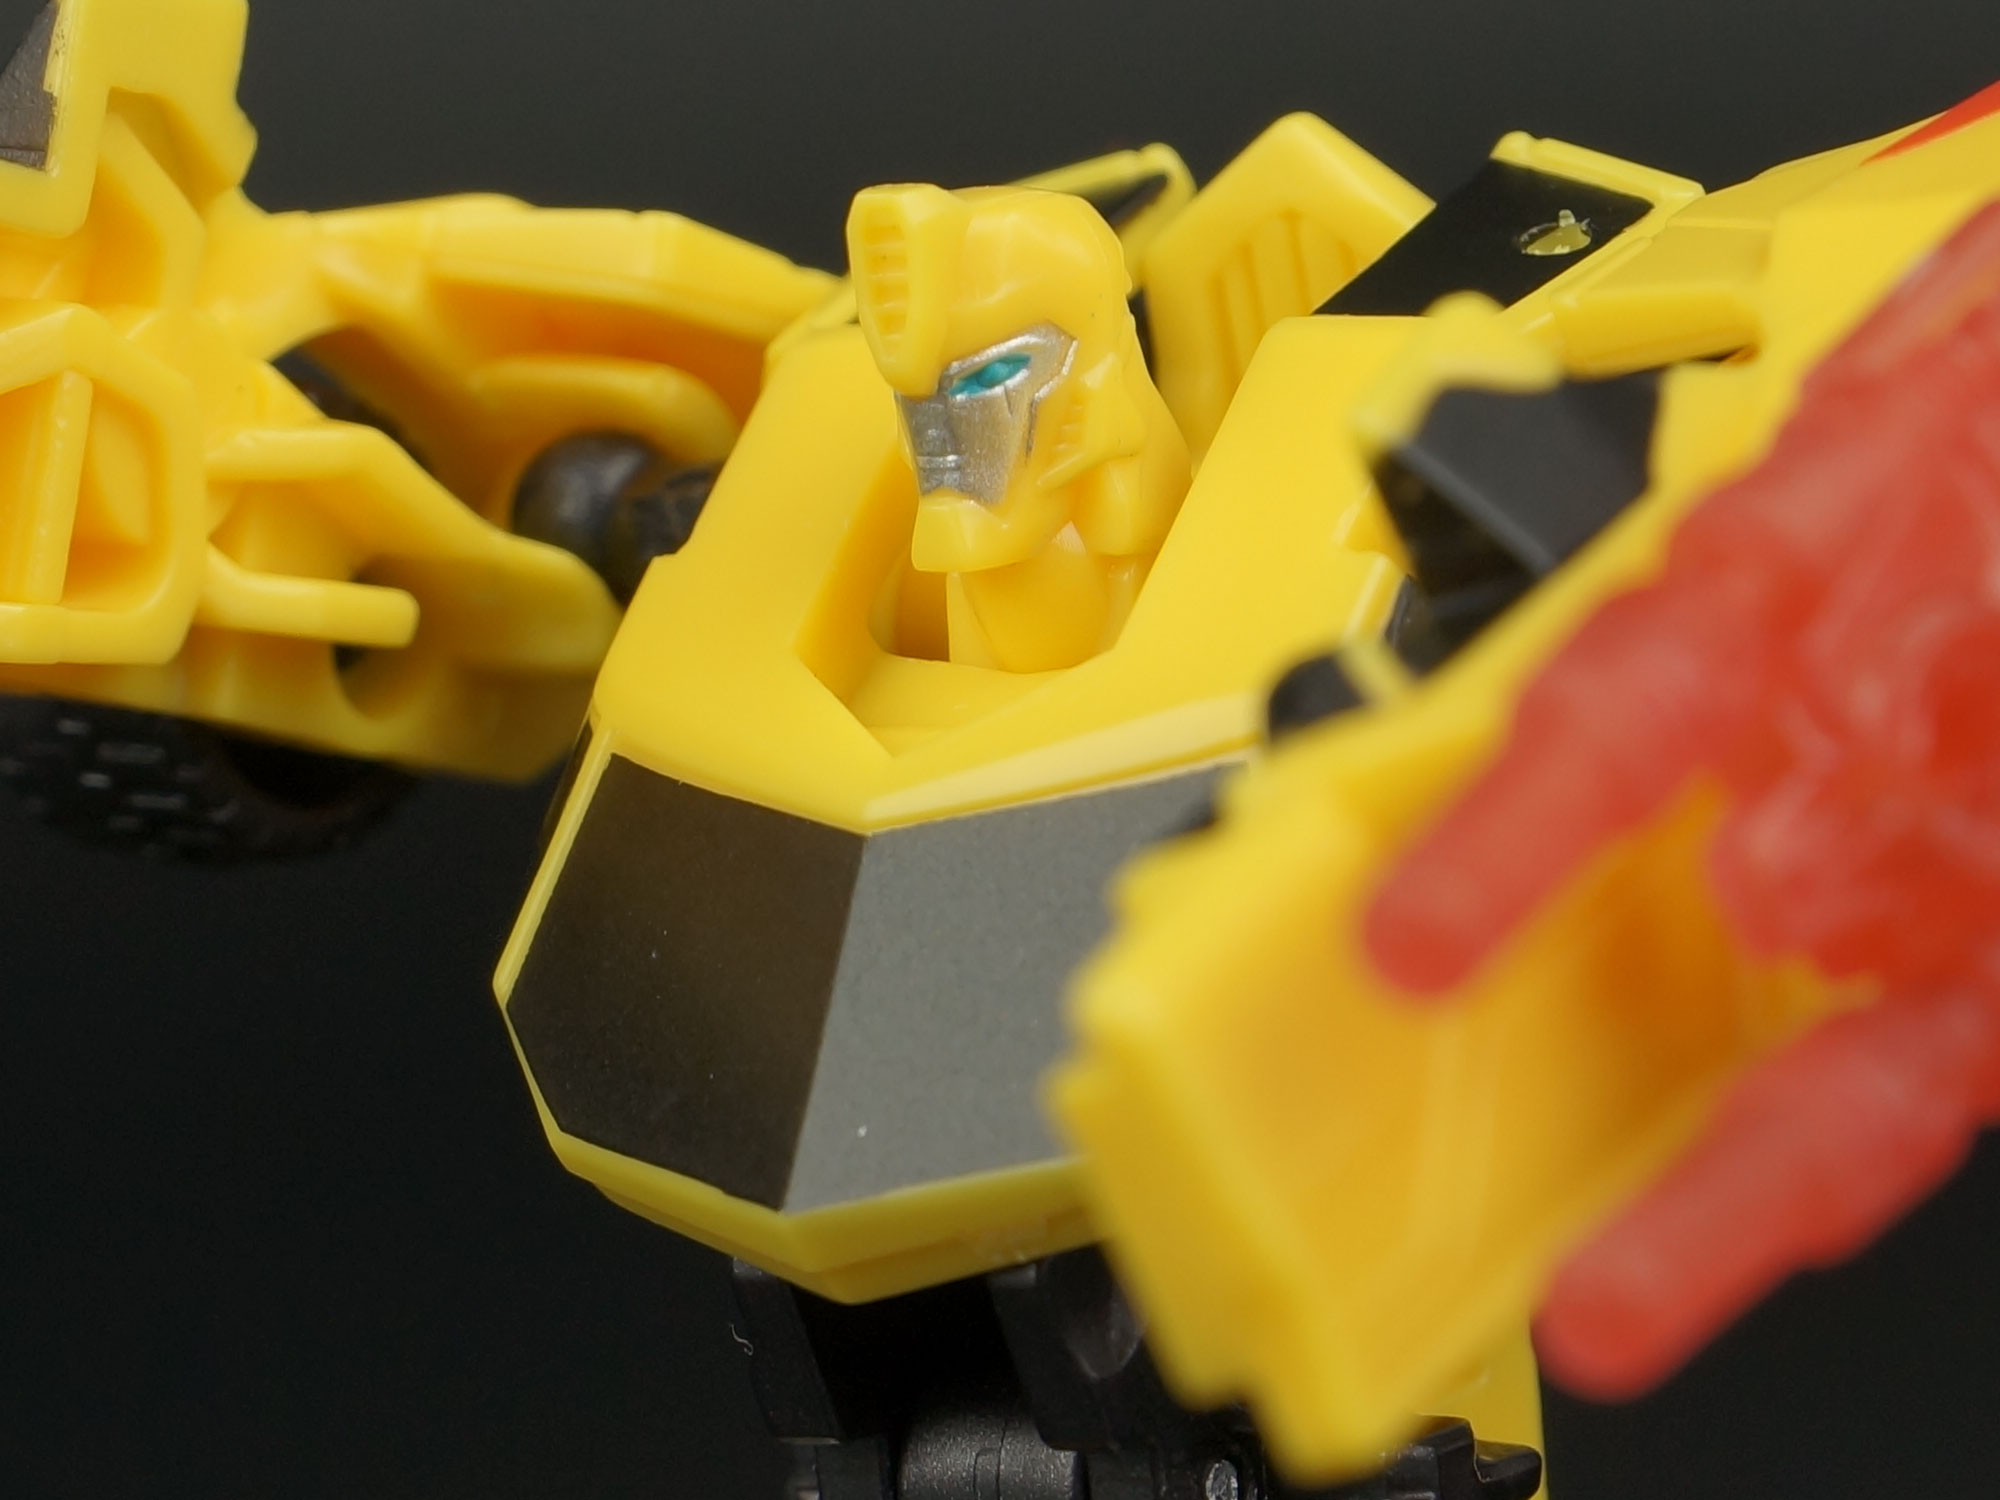 Transformers: Robots In Disguise Bumblebee (Image #75 of 75)